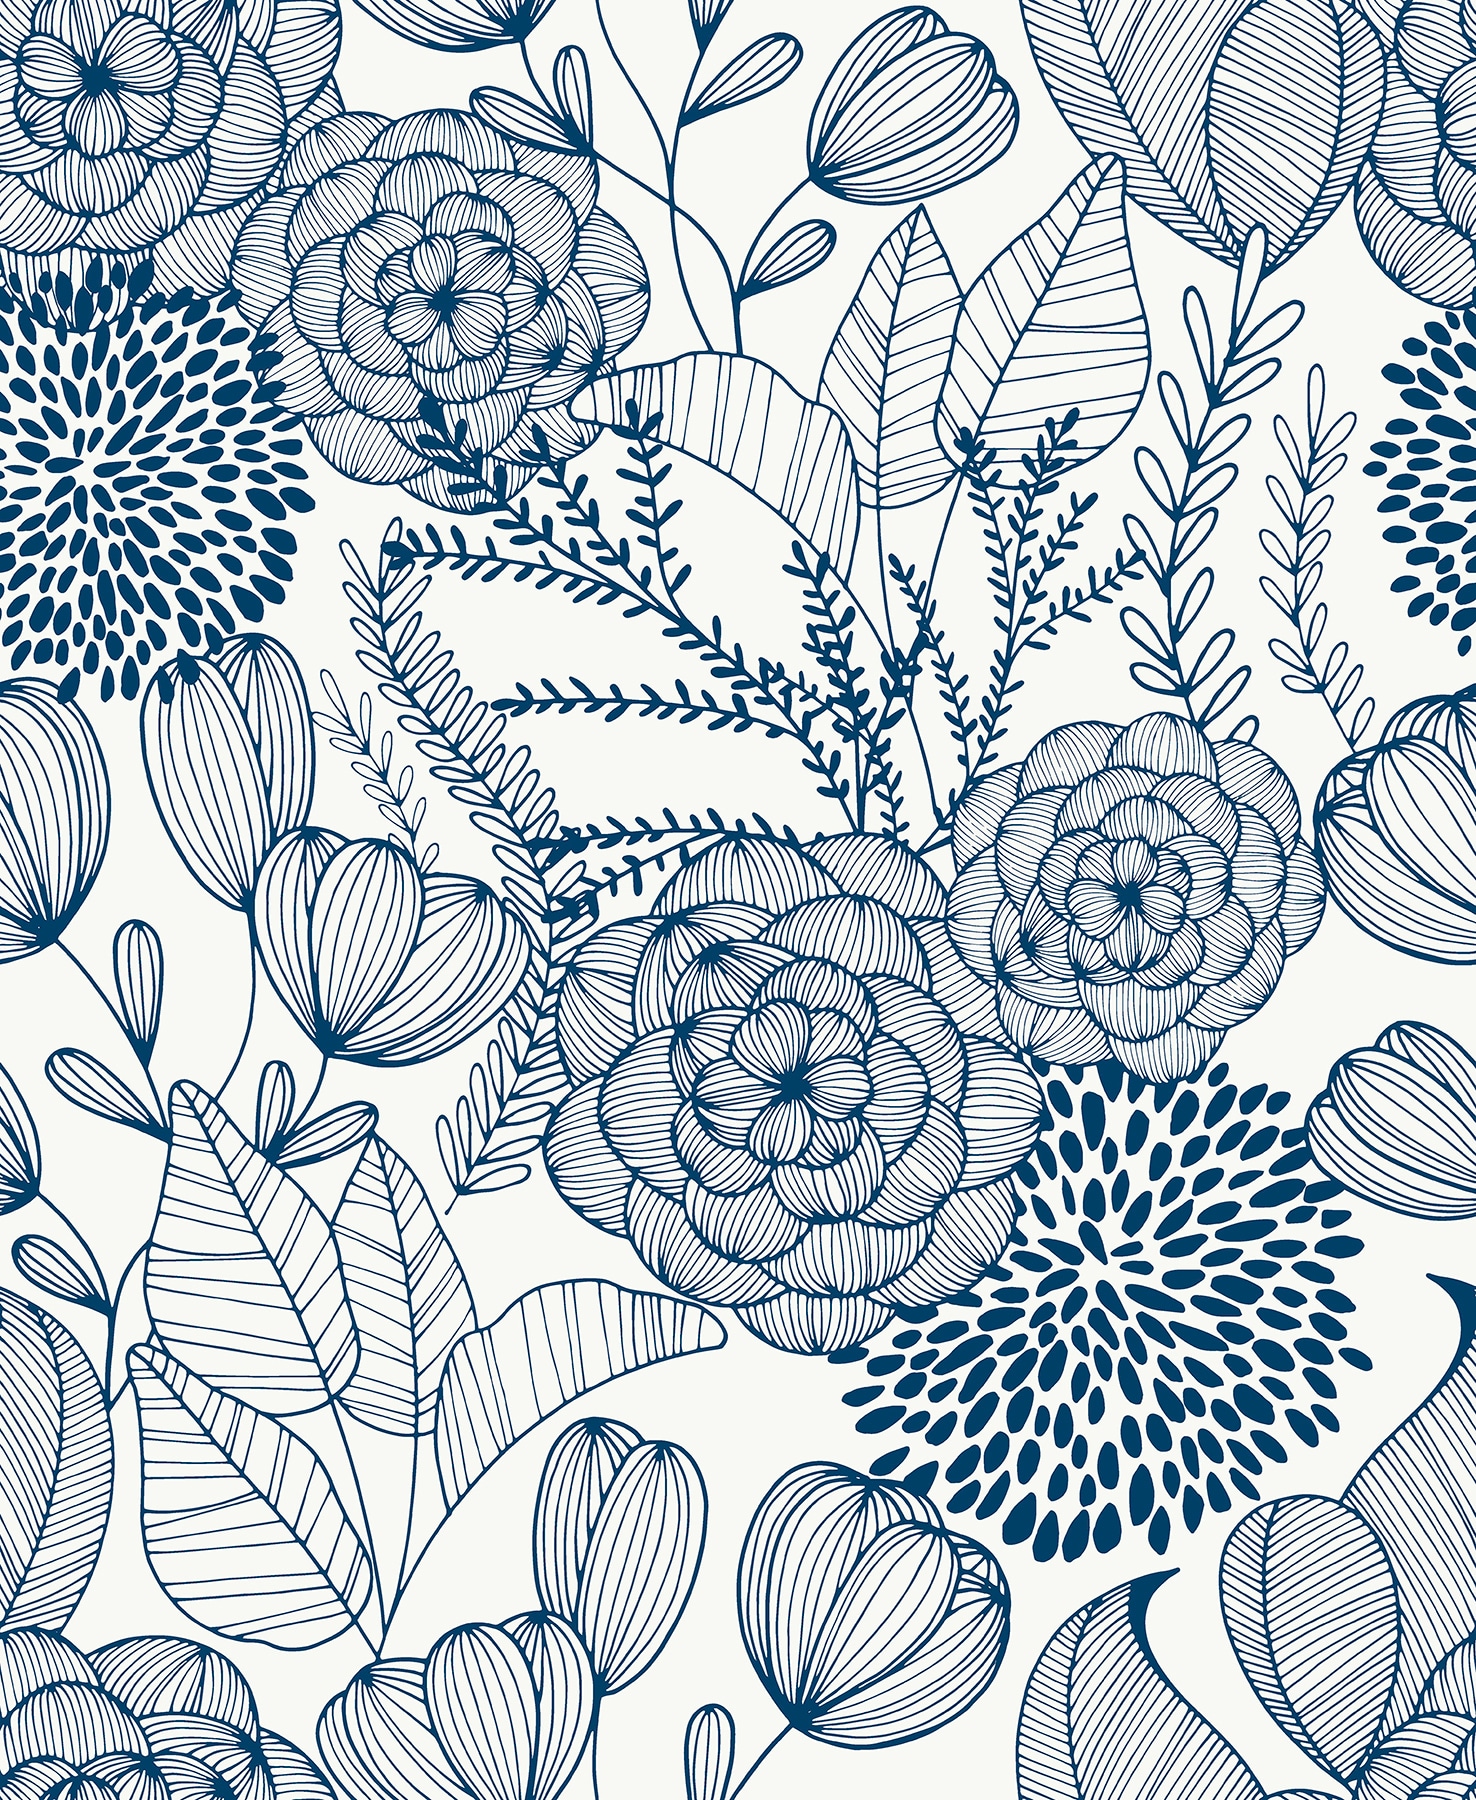 TREND 7 Navy Blue Wallpapers With Floralforest Prints  Dekornikcom  Wallstickers And Wallpapers Online Store